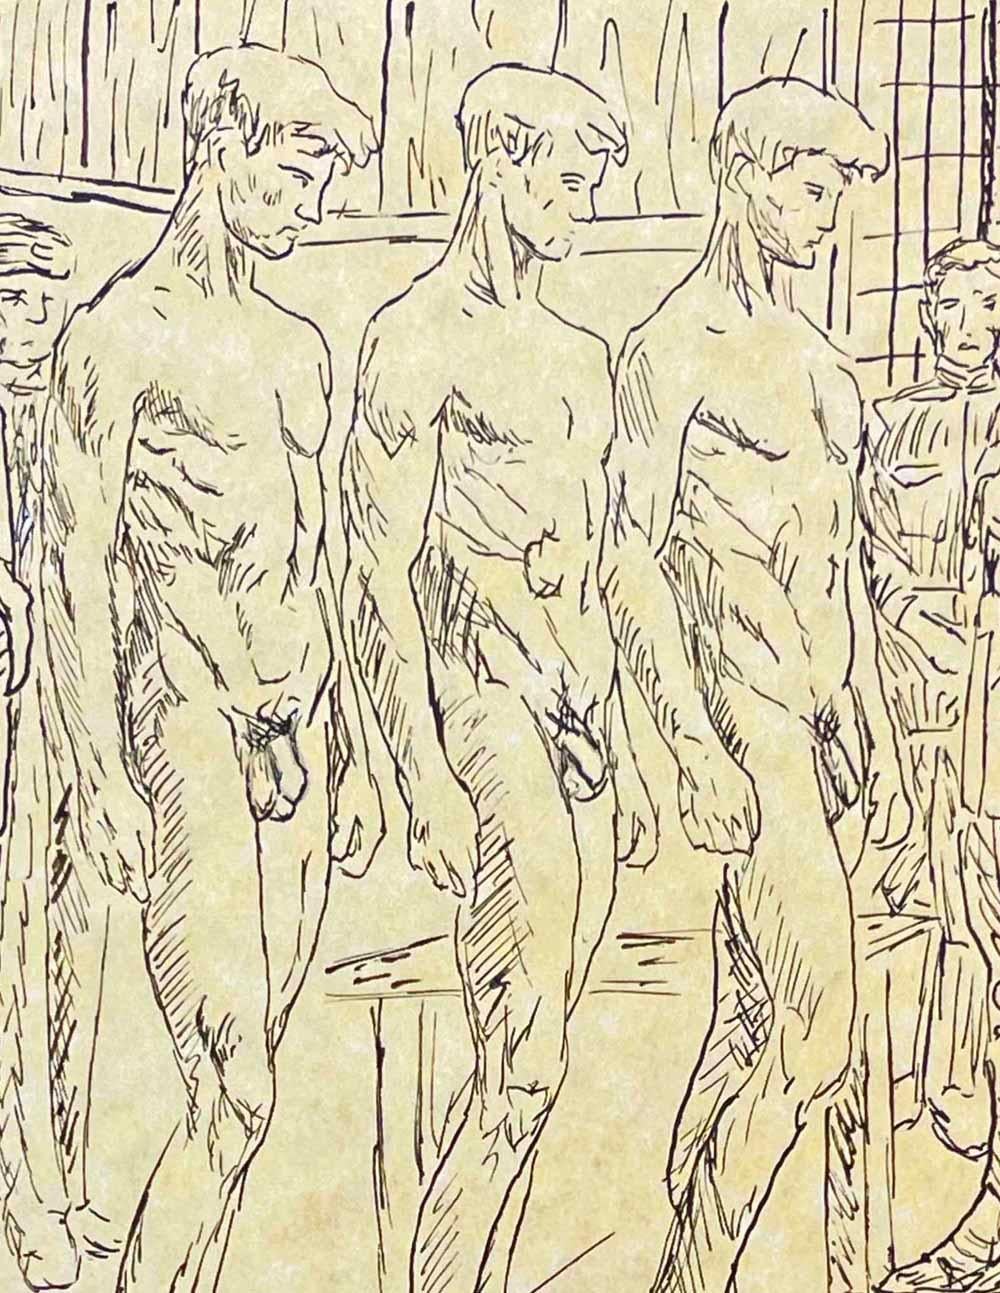 Clearly drawn to protest the induction and destruction of young men in the name of war, this ink sketch depicts three inductees in the British army, surrounded by uniformed officers judging their fitness to serve.  The artist has sketched the